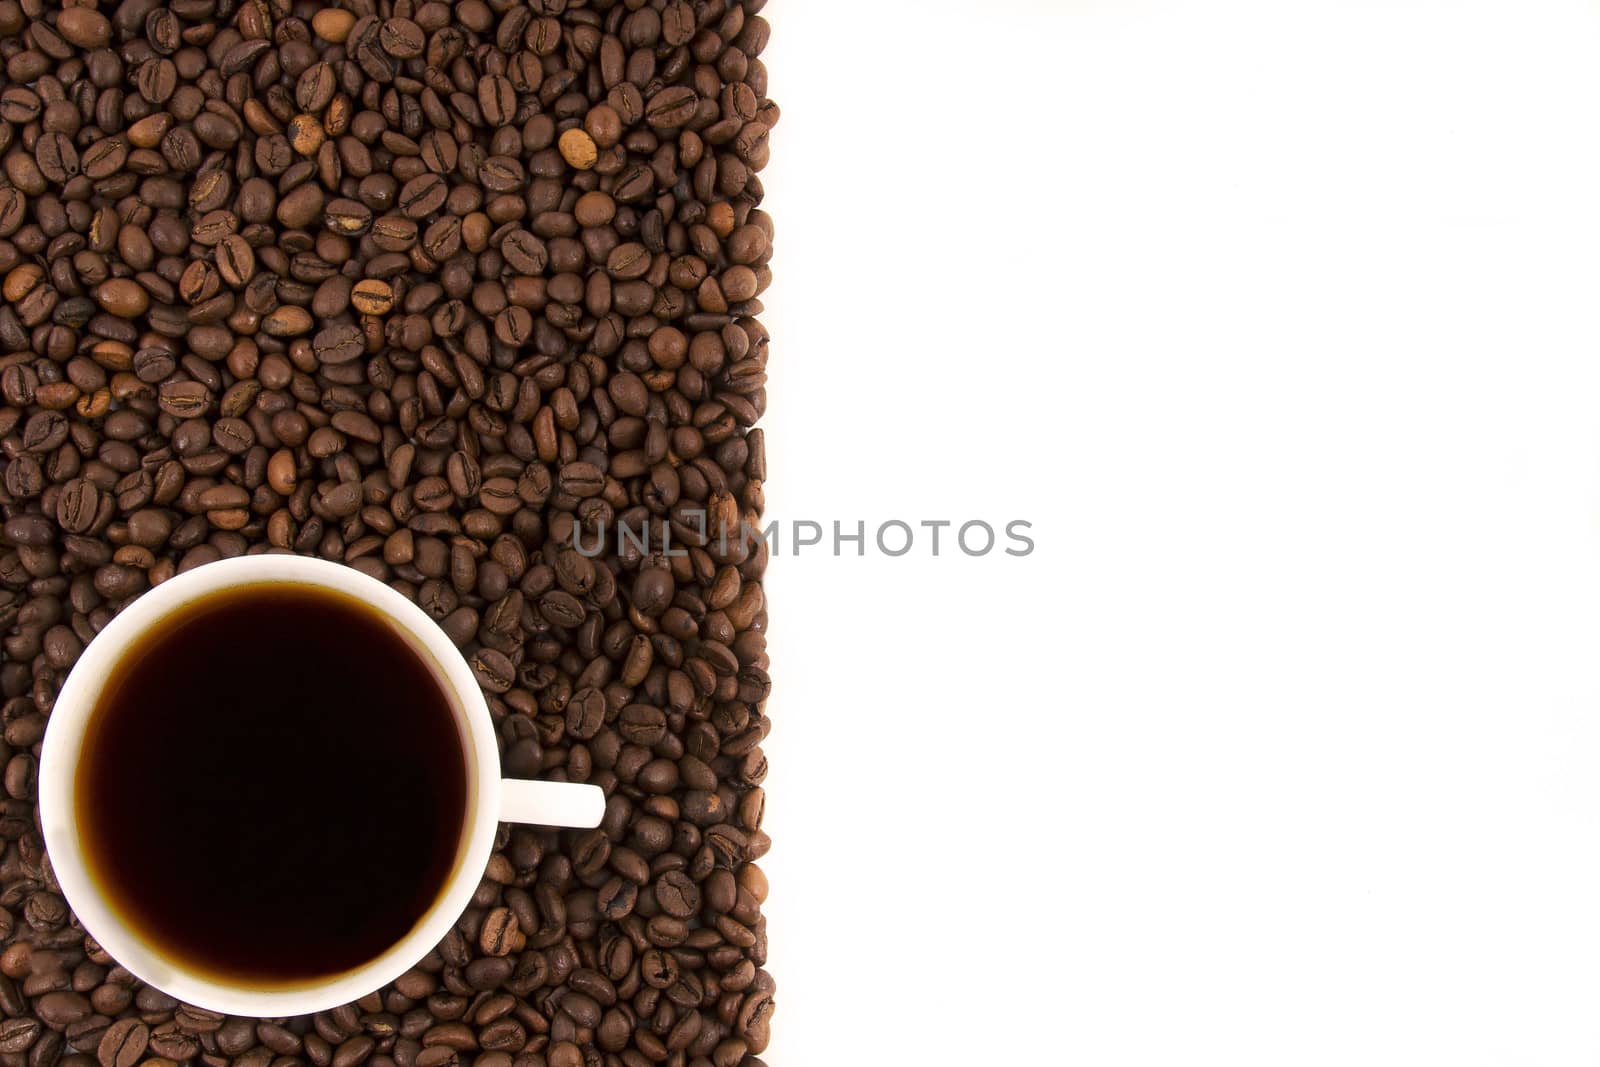 Coffee cup with coffee beans on a white background.